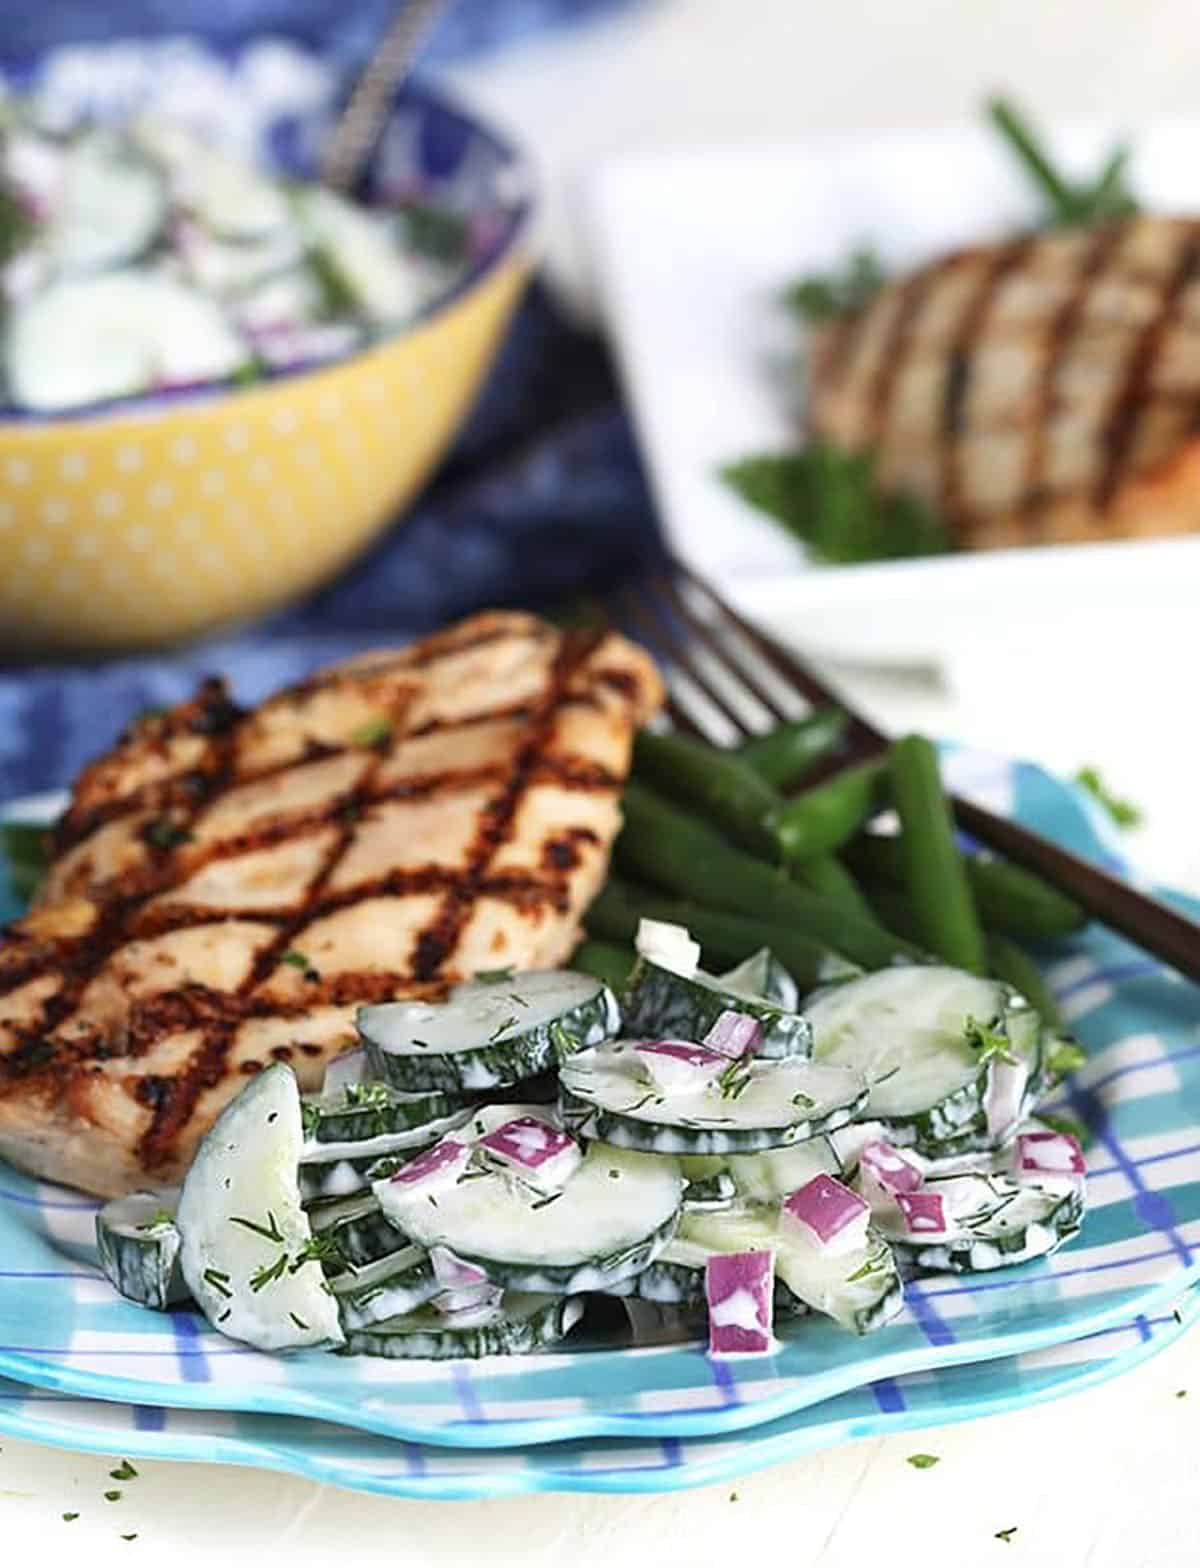 Creamy cucumber salad on a plate with grilled chicken breast.